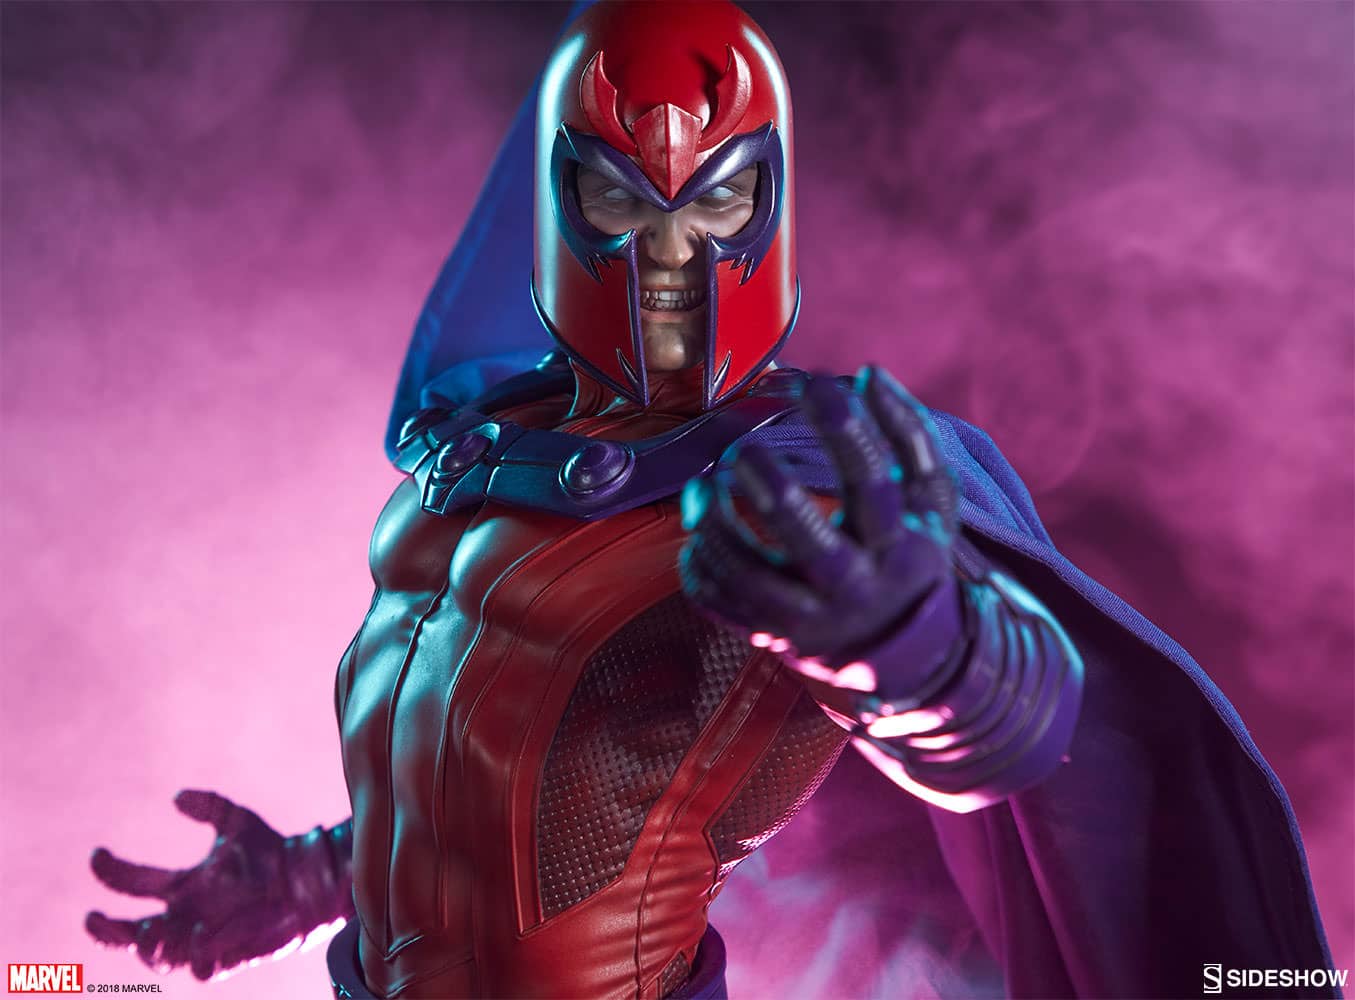 A black magneto can still work for a lot of reasons. Pic courtesy: sideshow.com